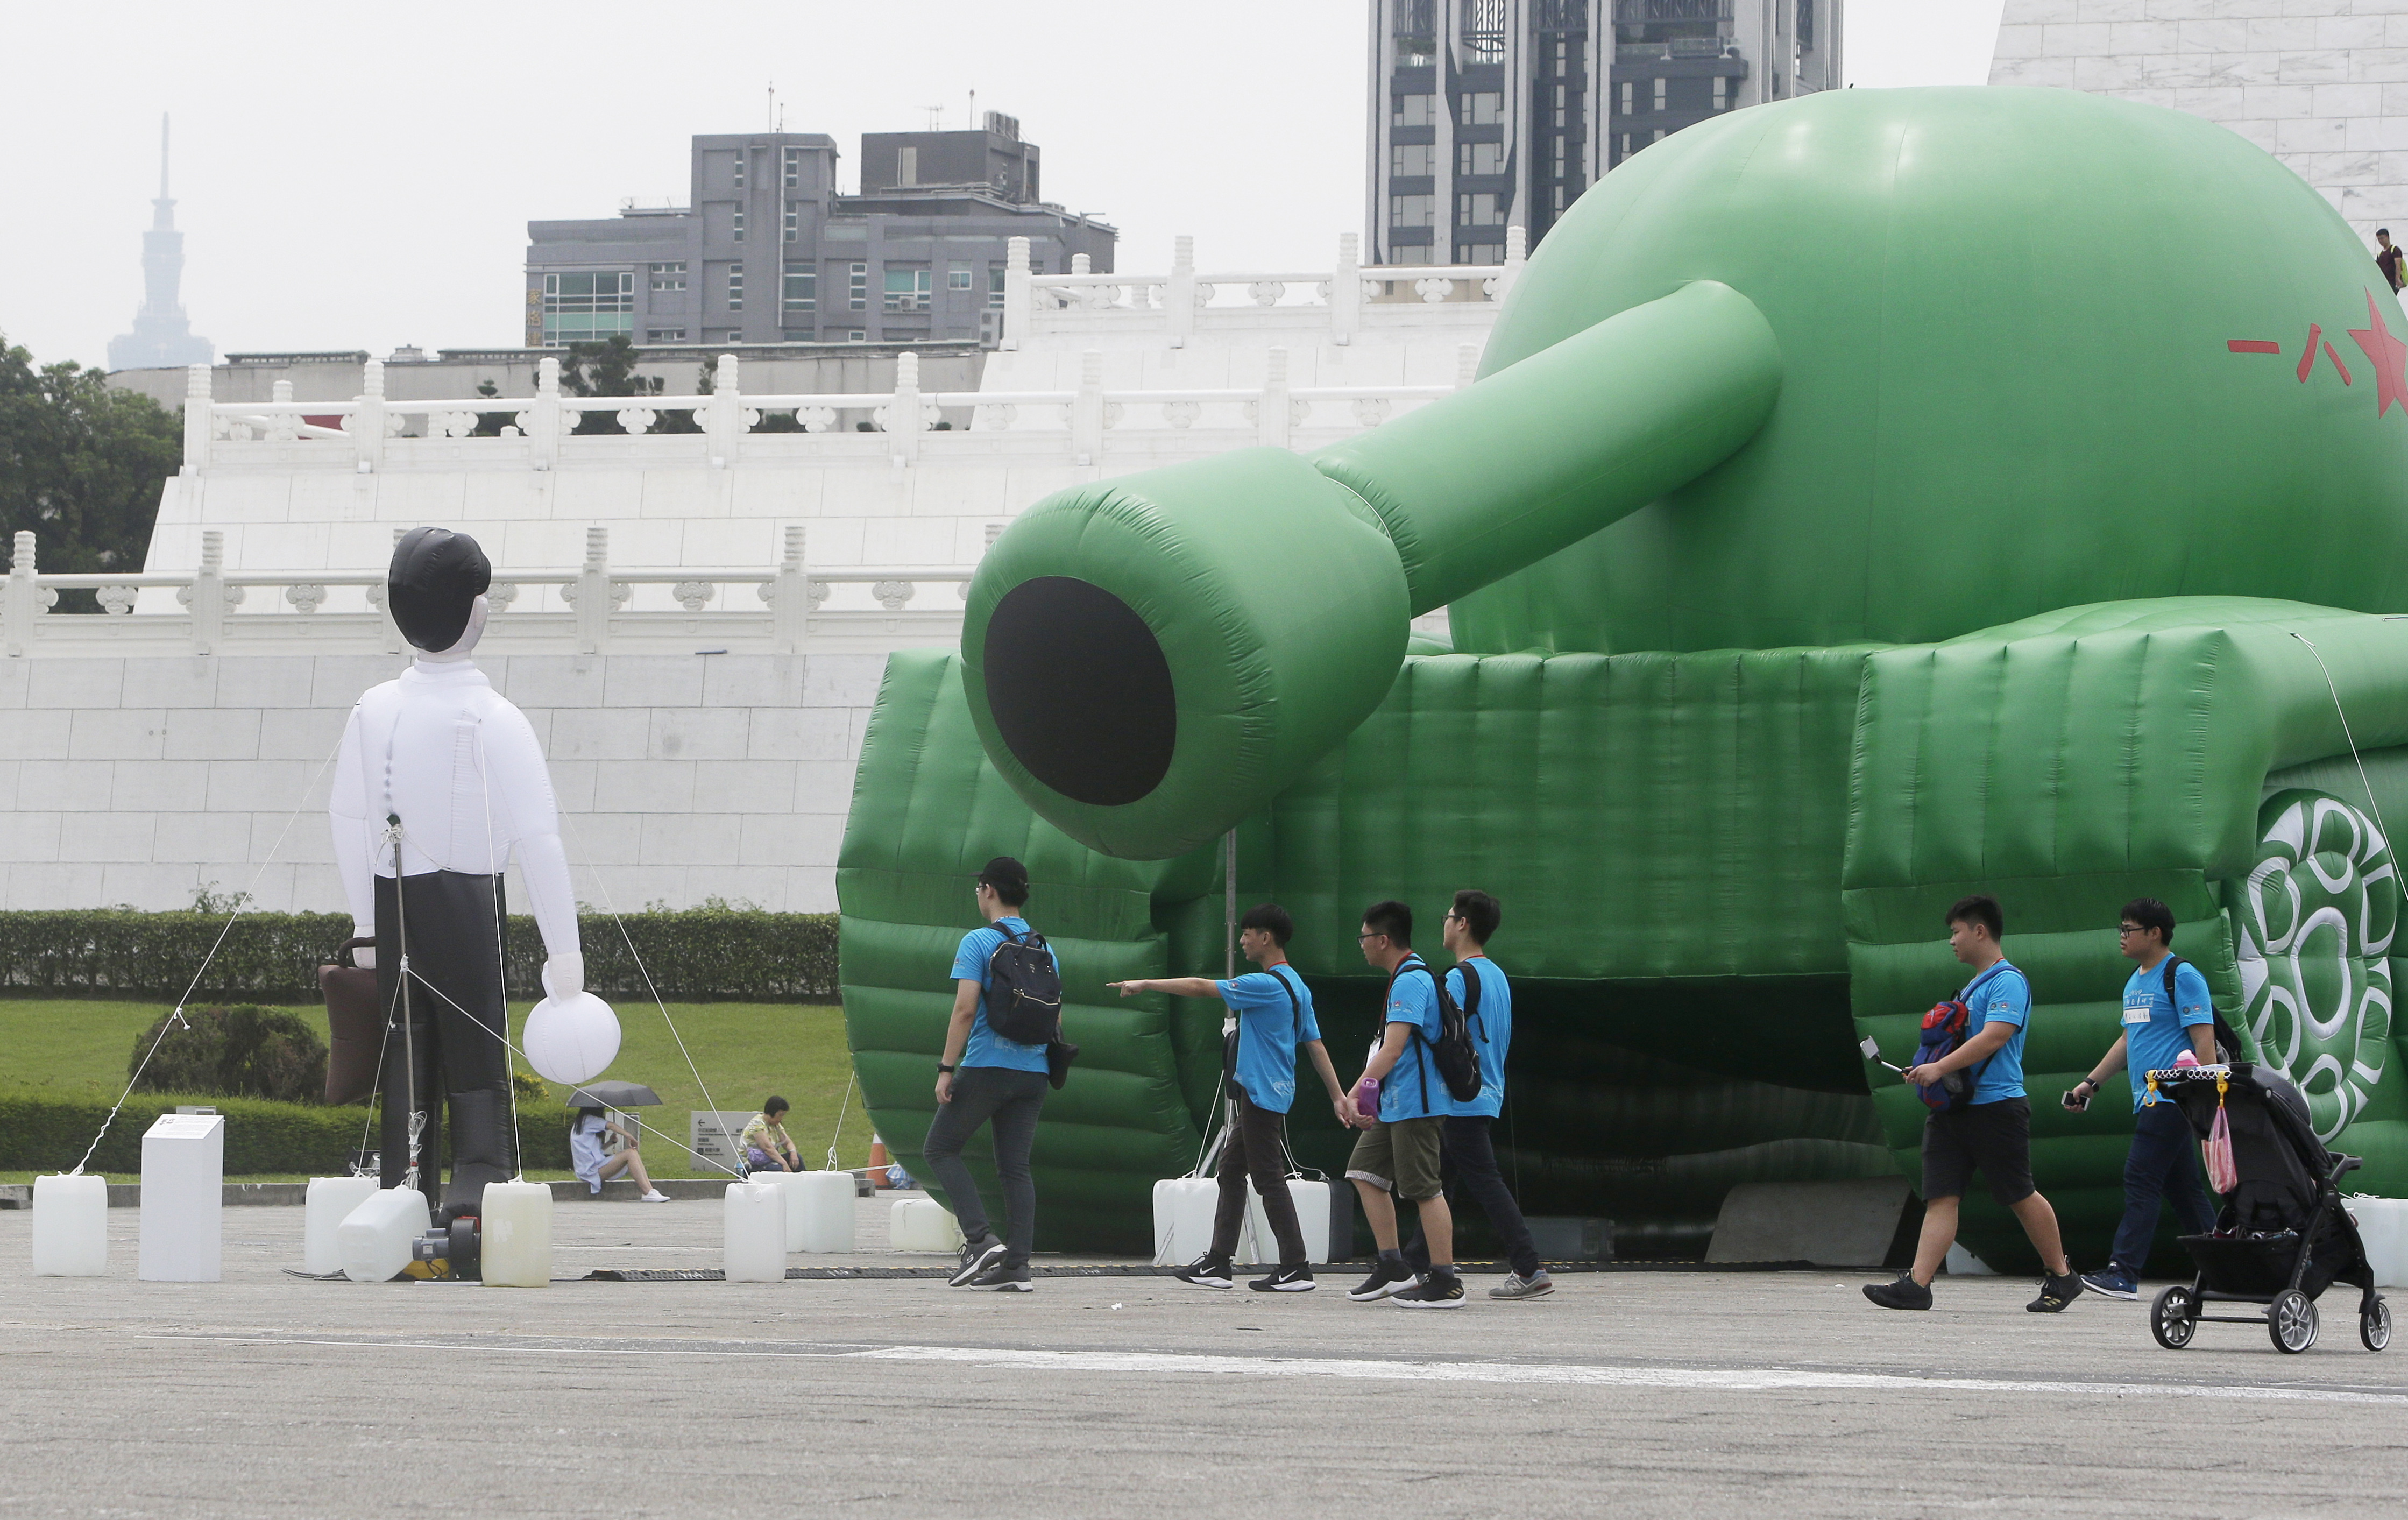 Chinese tourists walk past an inflatable tank man at the Liberty Square of Chiang Kai-shek Memorial Hall in Taipei, Taiwan, Saturday, June 1, 2019. An artist erected the inflatable display in Taiwan’s capital to mark an iconic moment in the Tiananmen Square pro-democracy protests. The larger-than-life balloon installation, which stands in front of Taipei’s famous hall, portrays a peaceful encounter between a Chinese civilian and the military tanks that contributed to a brutal shutdown of the demonstrations in Beijing on June 4, 1989. (AP Photo/Chiang Ying-ying)